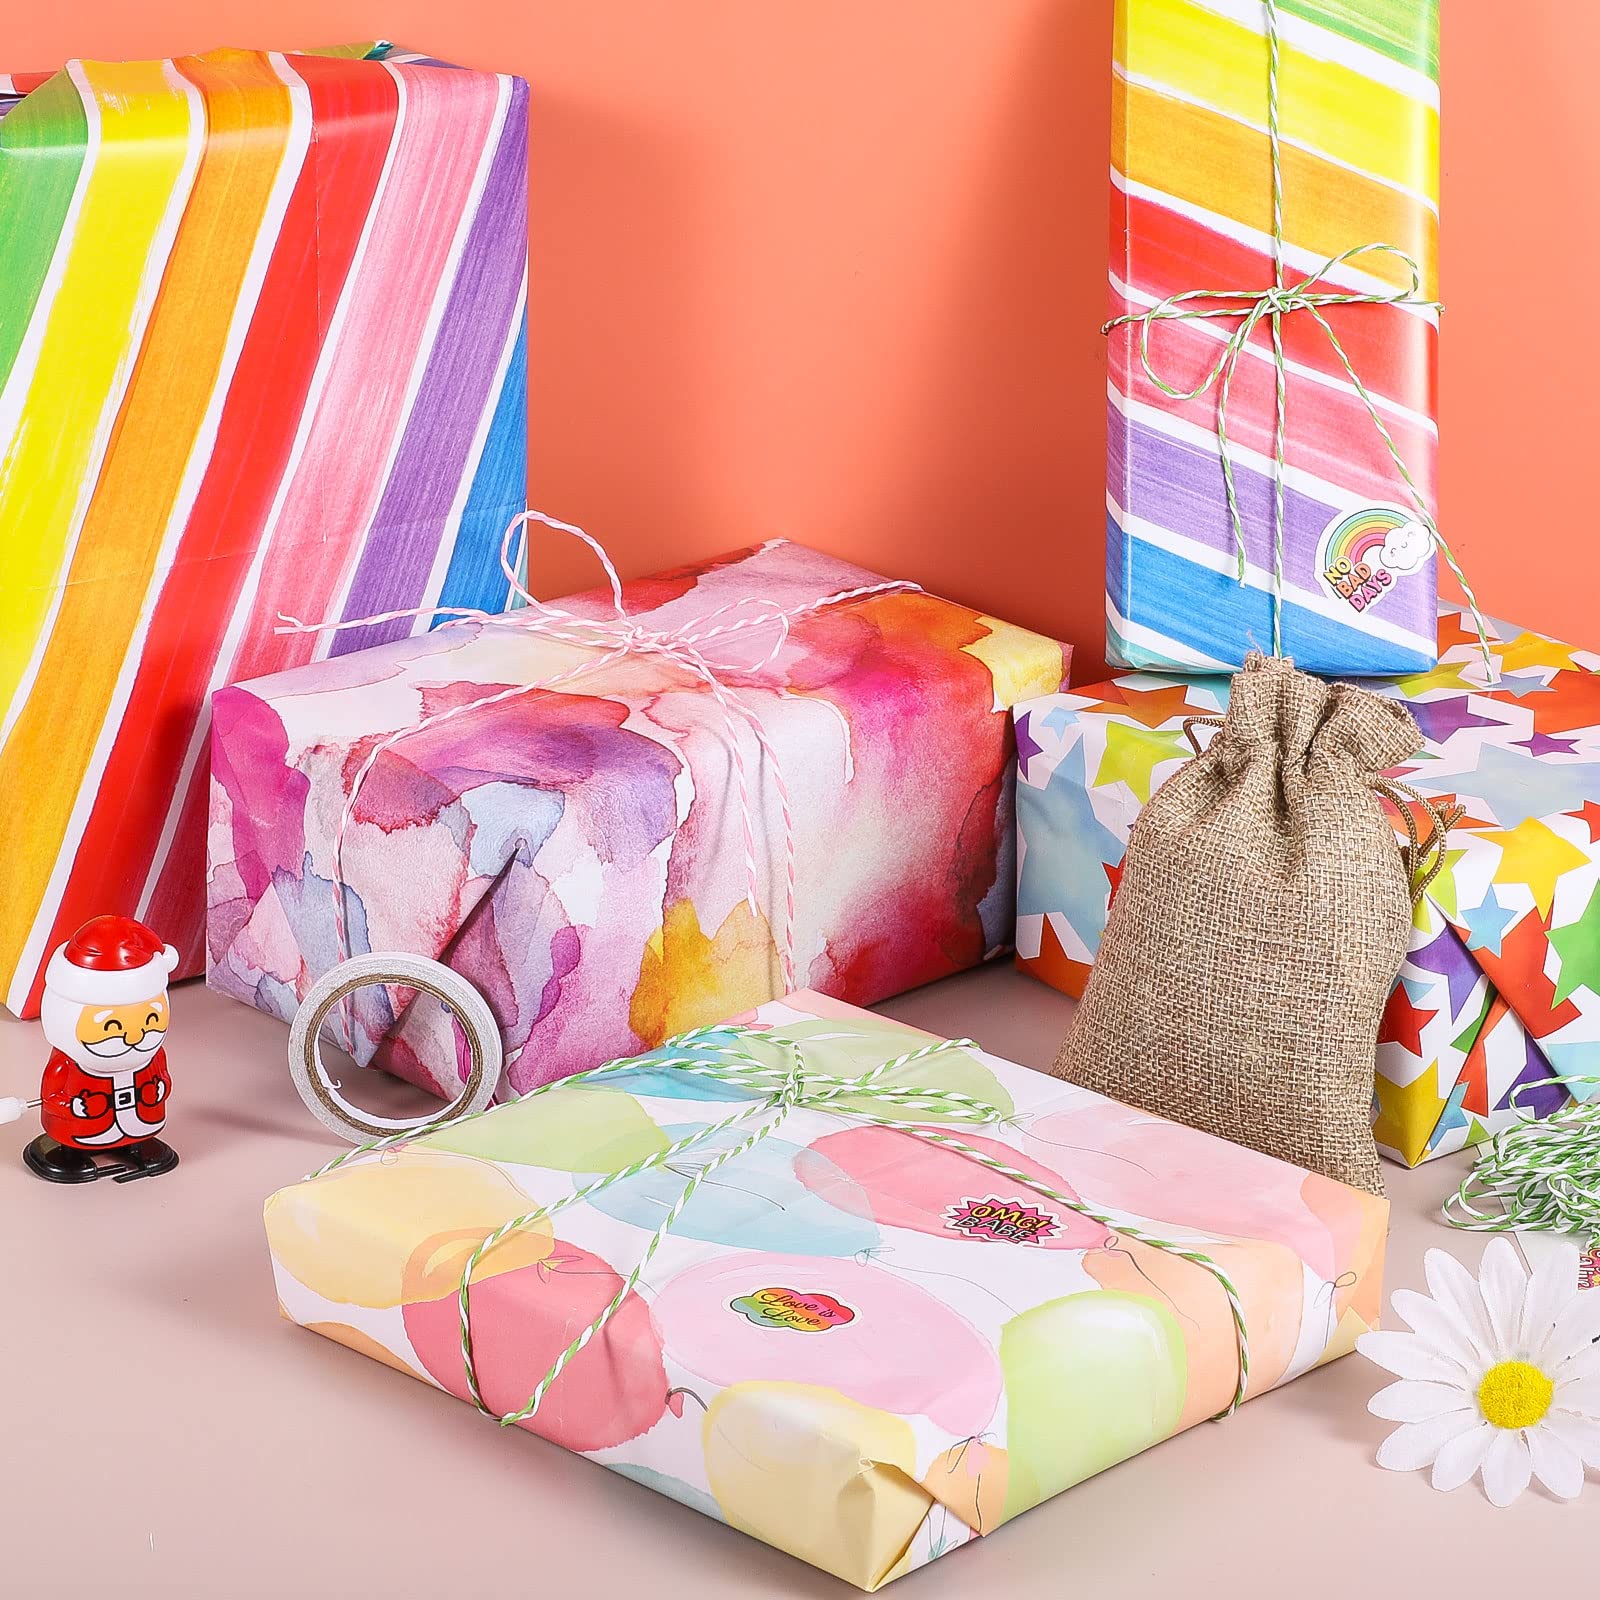 6 x Rainbow Wrapping Paper, 50 x 70cm Happy Birthday Wrapping Paper with Sticker and Rope Gift Wrap Set for Festival, Party or Wedding Gift Wrapping